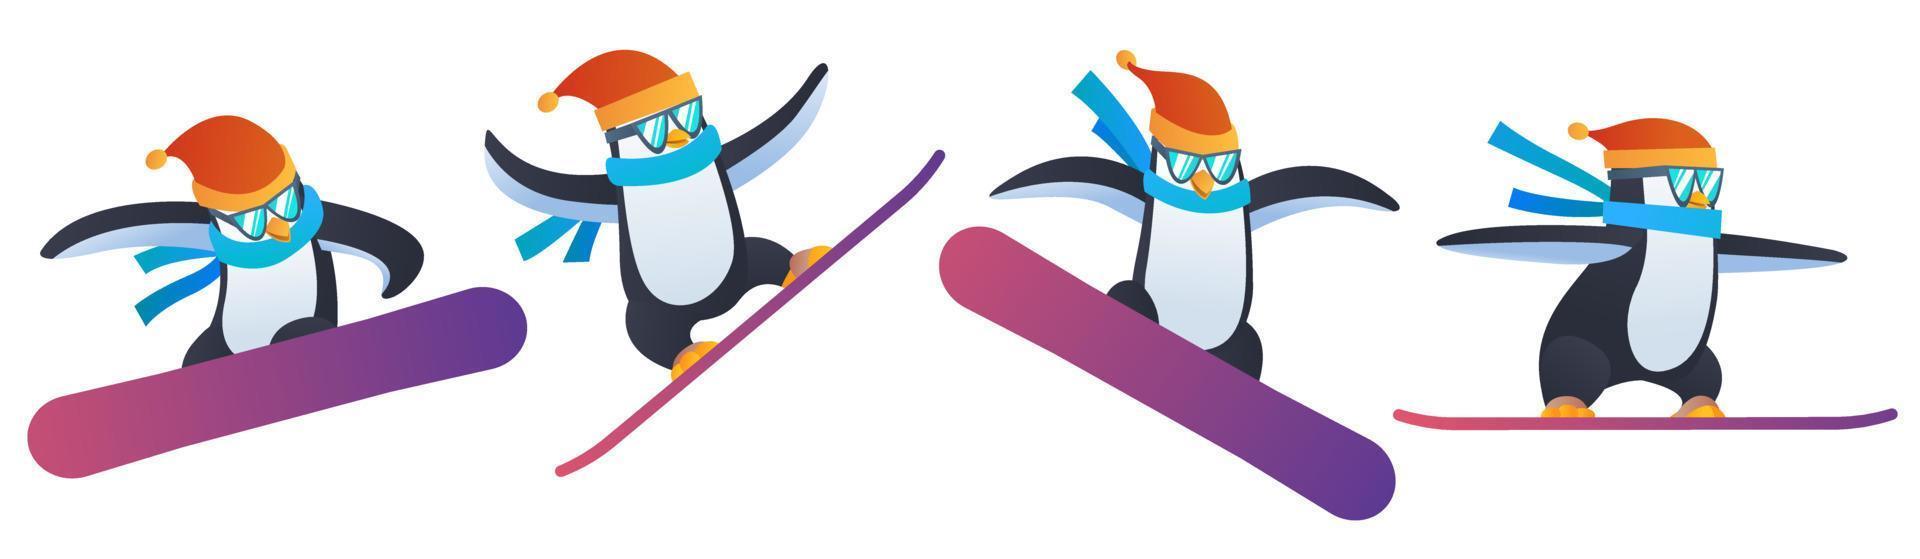 Penguin snowboard in various poses character vector